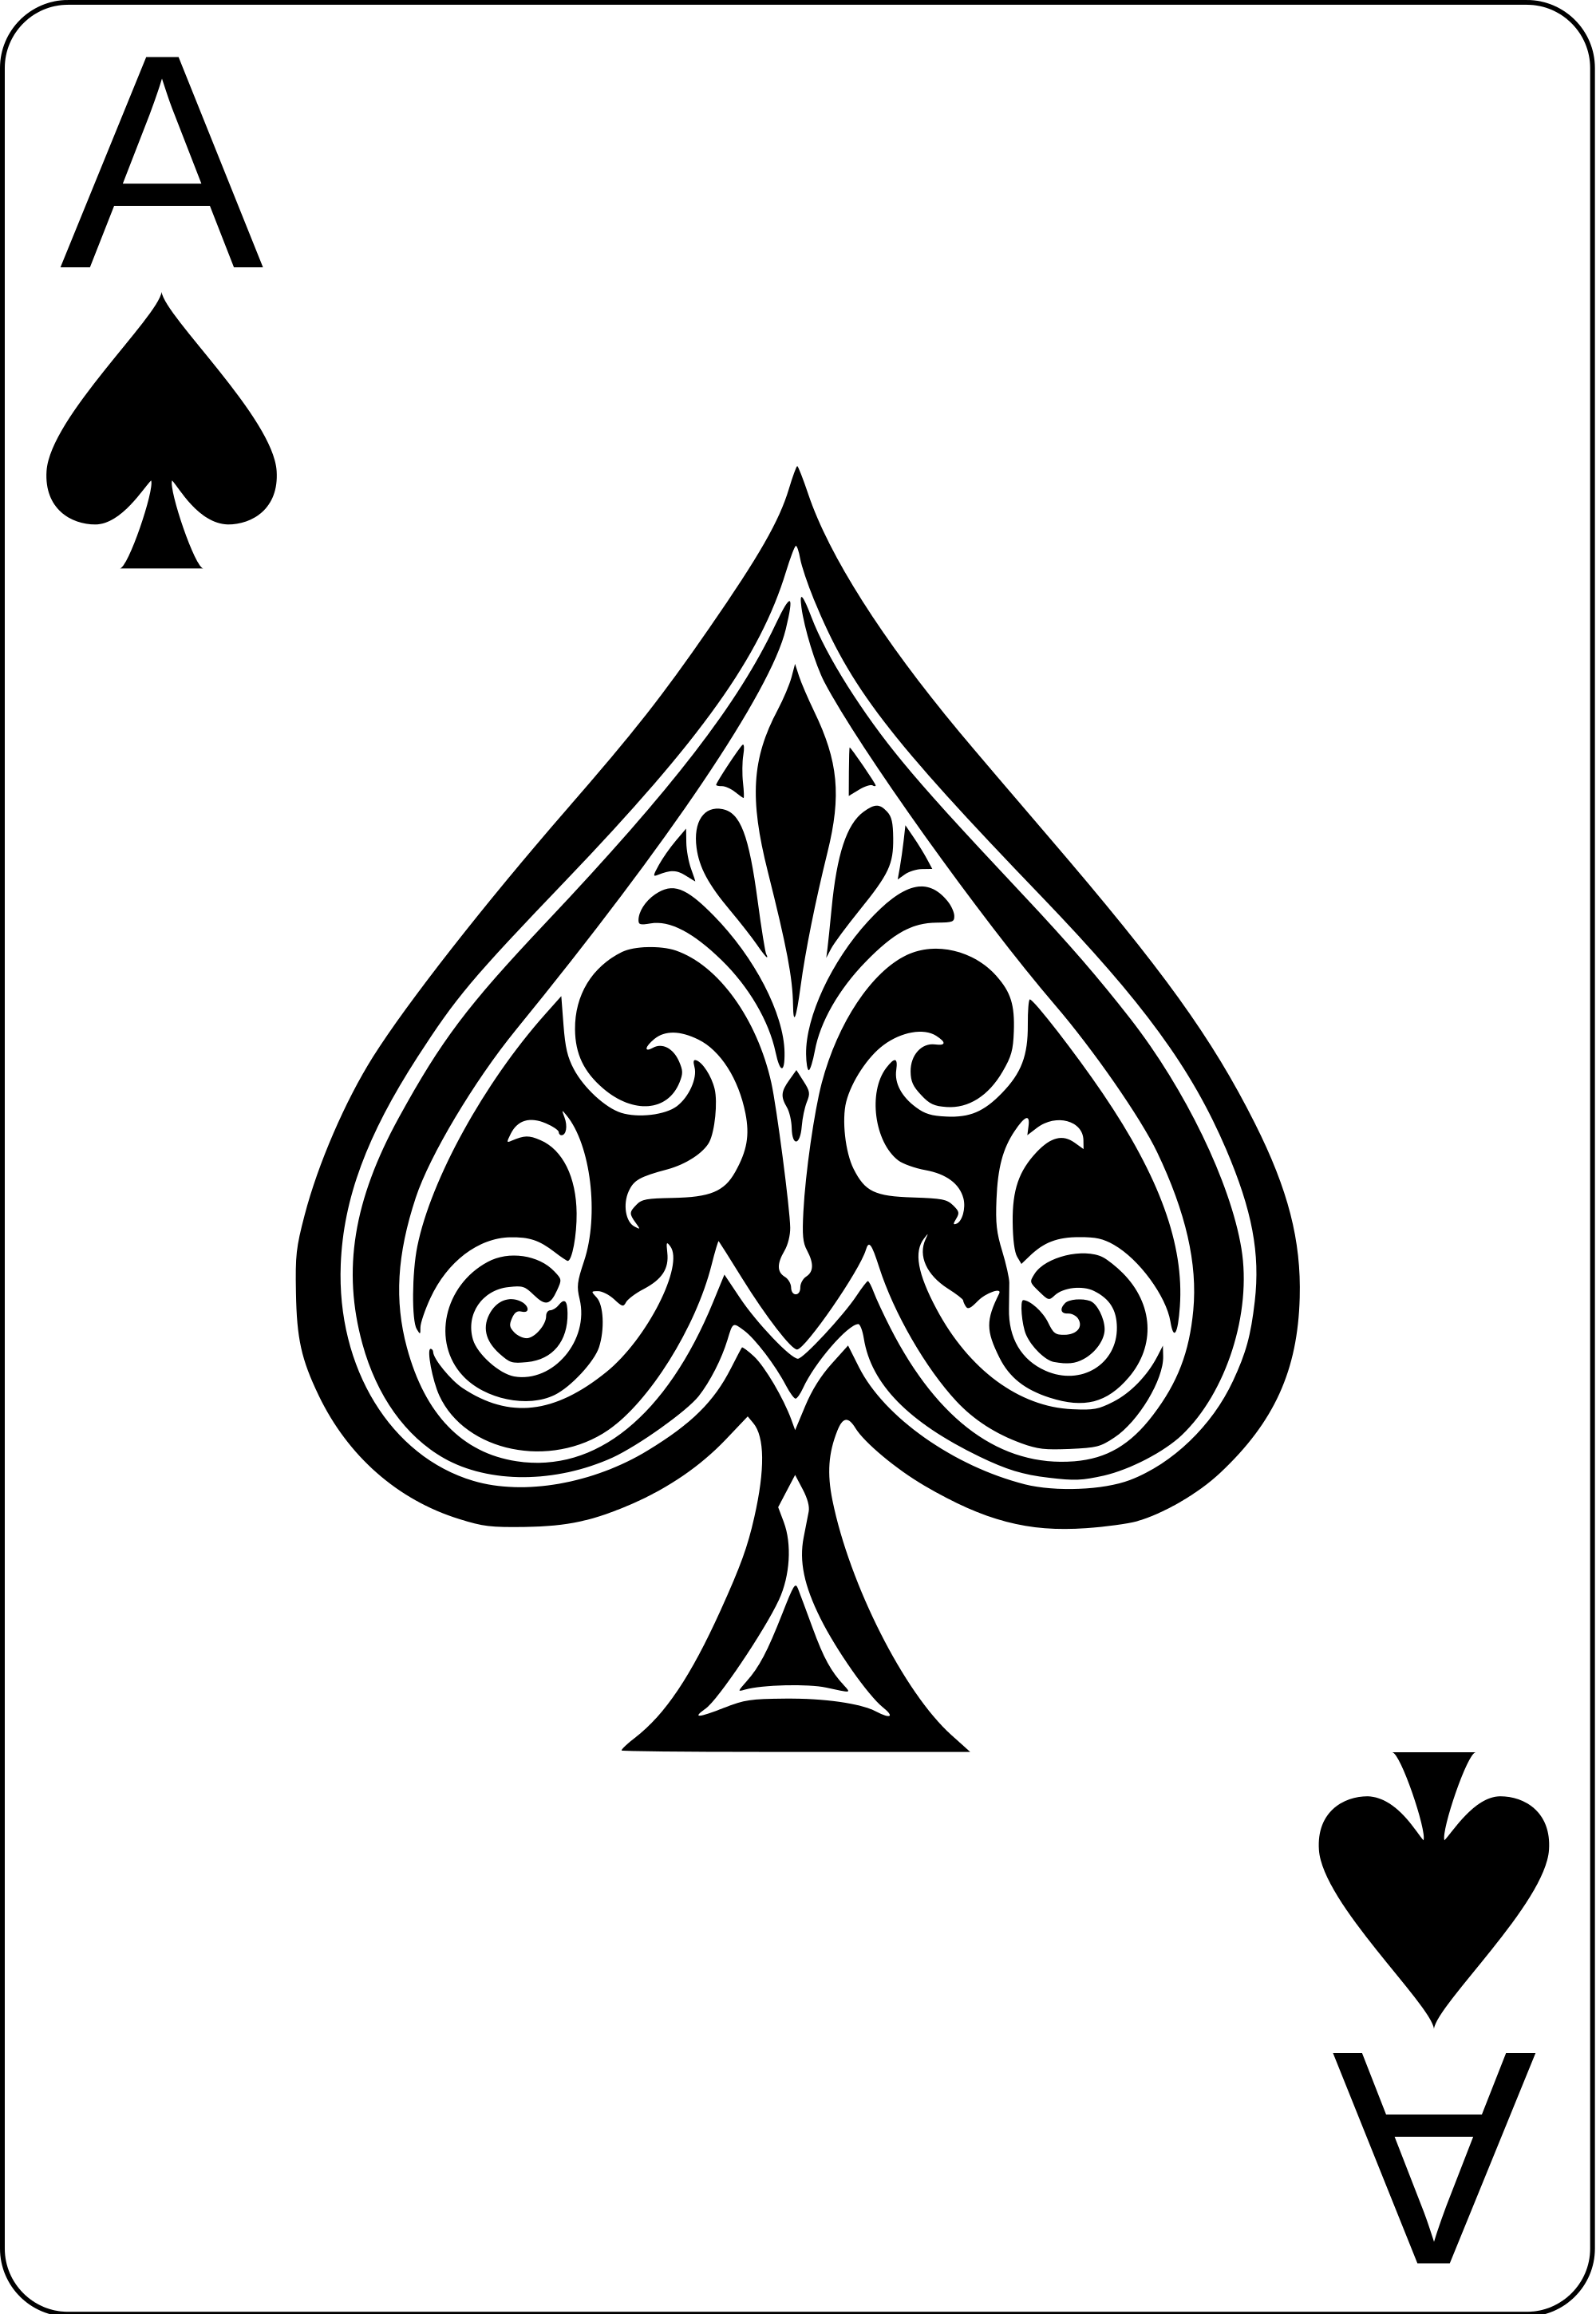 File:Ace of spades.svg - Wikimedia Commons